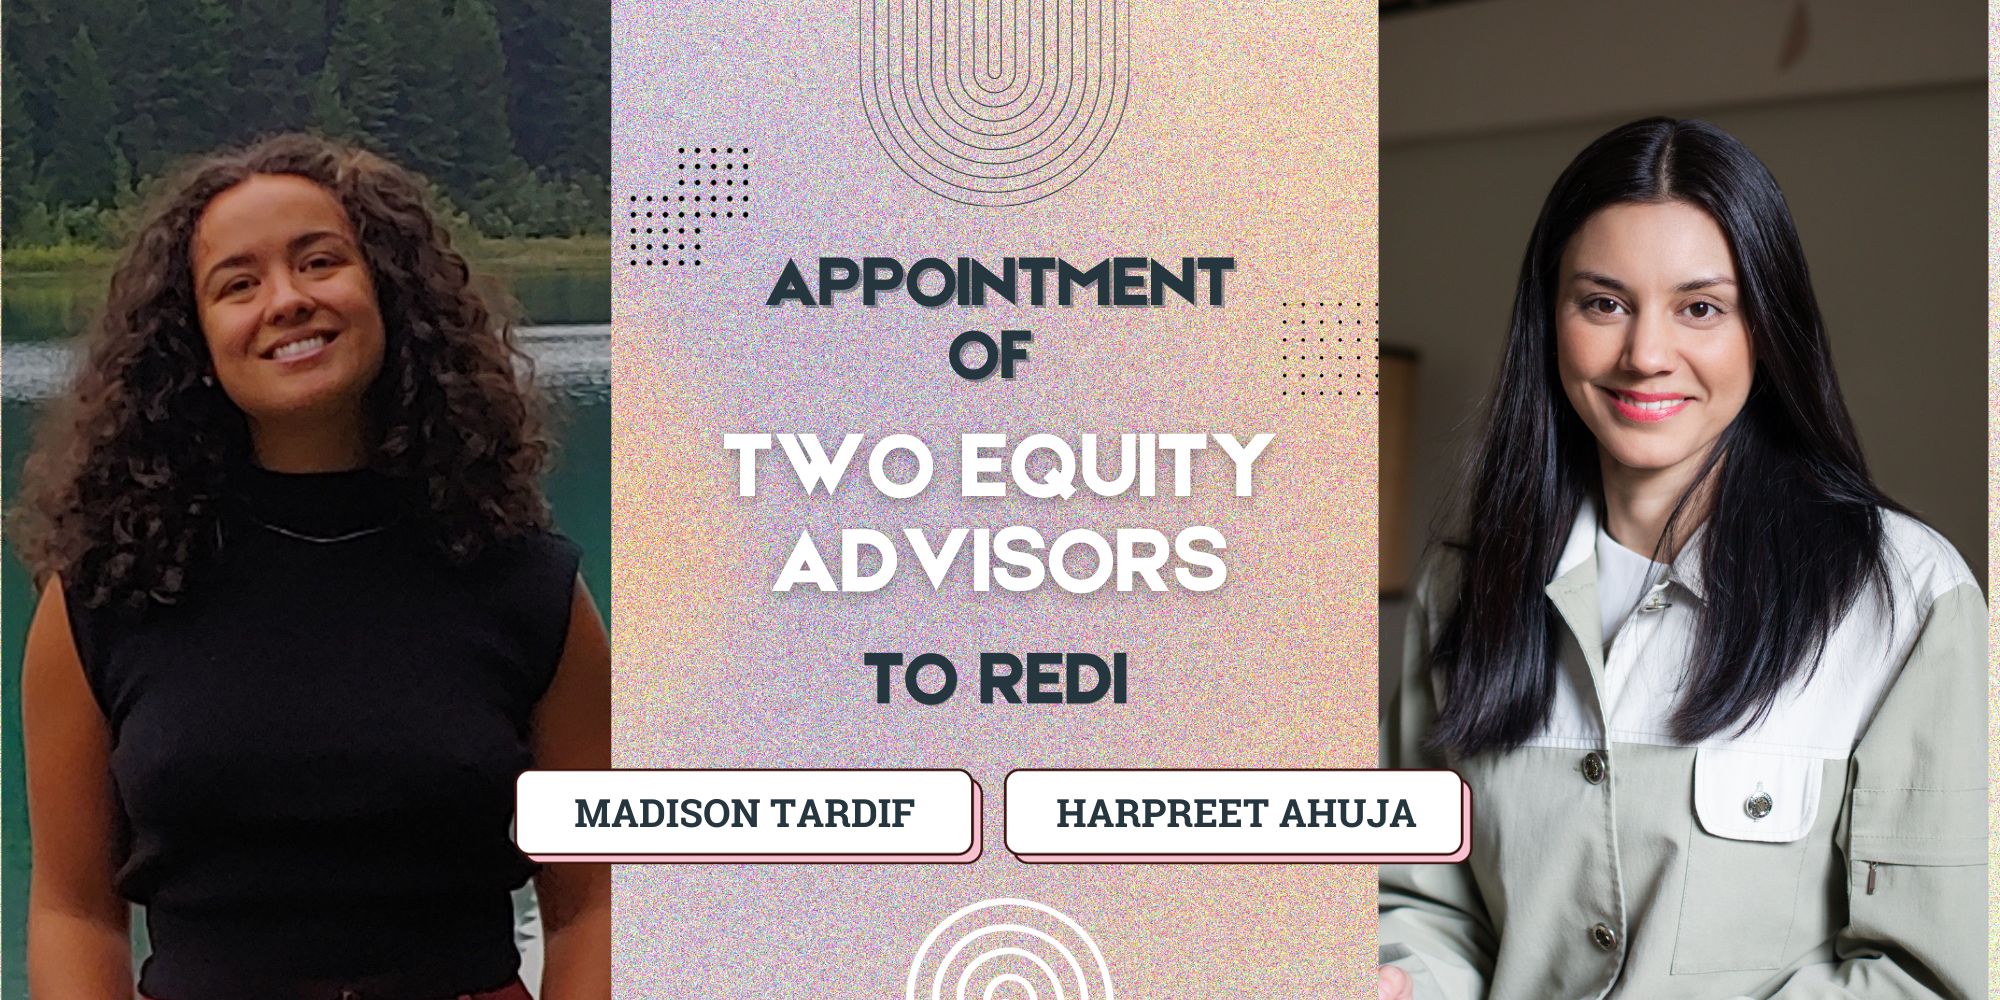 we would like to welcome our new equity advisors, Harpreet Ahuja and Madison Tardif, to the REDI team